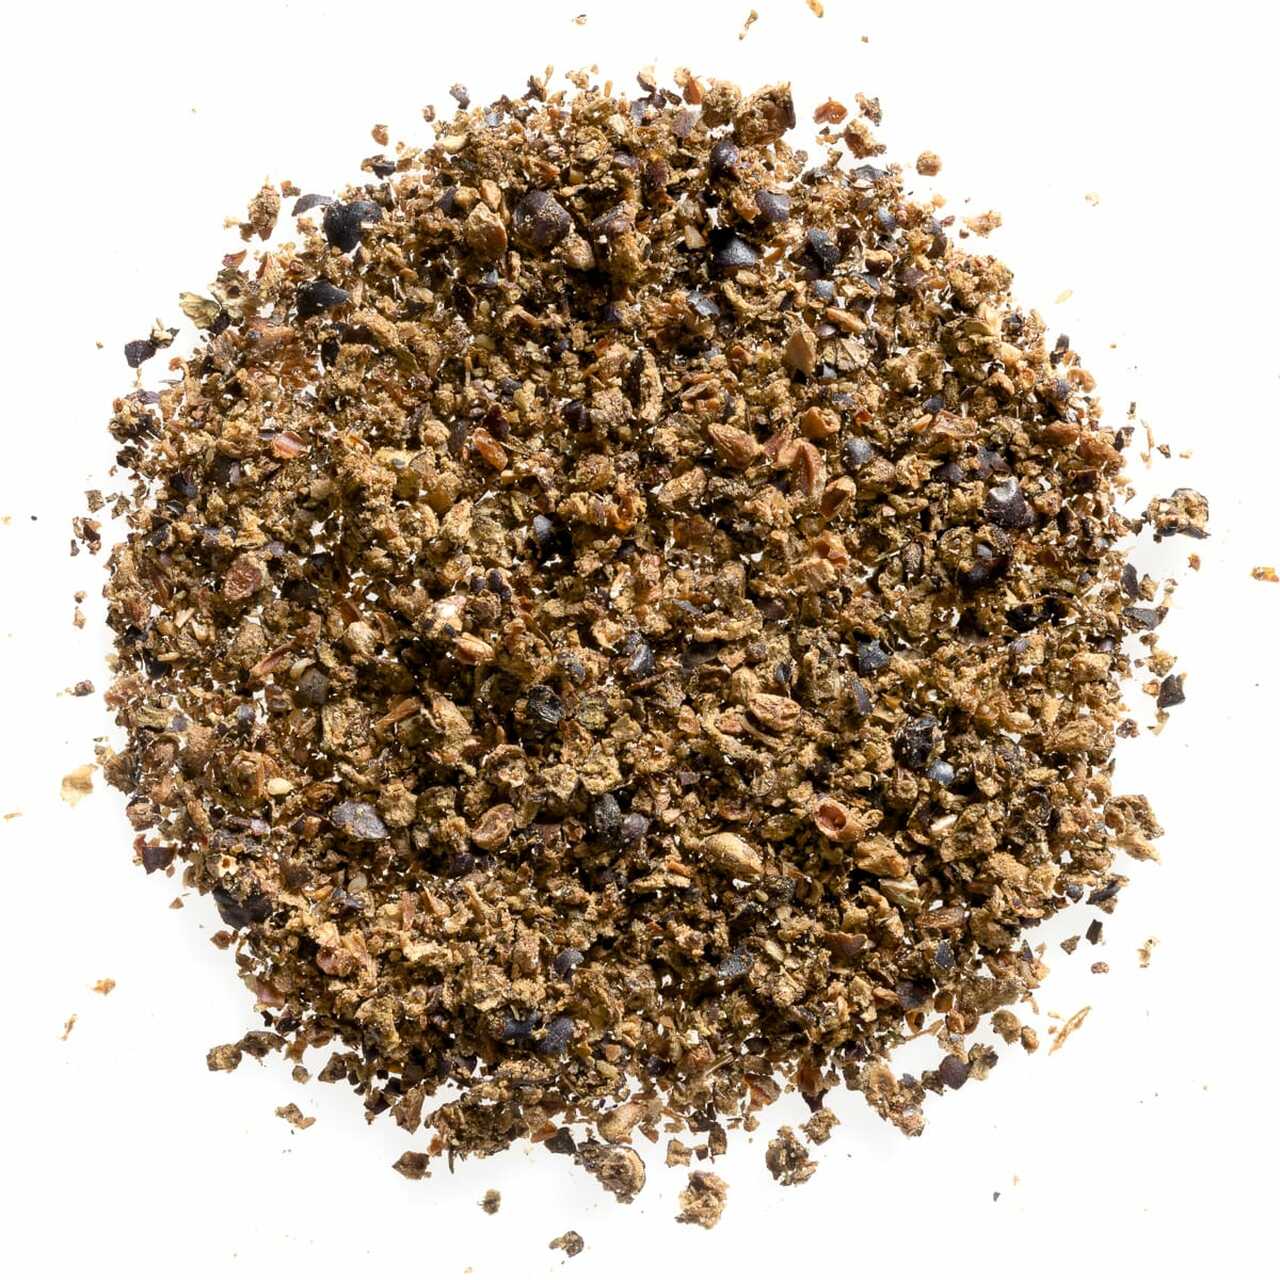 Coarsely grounded spice berries